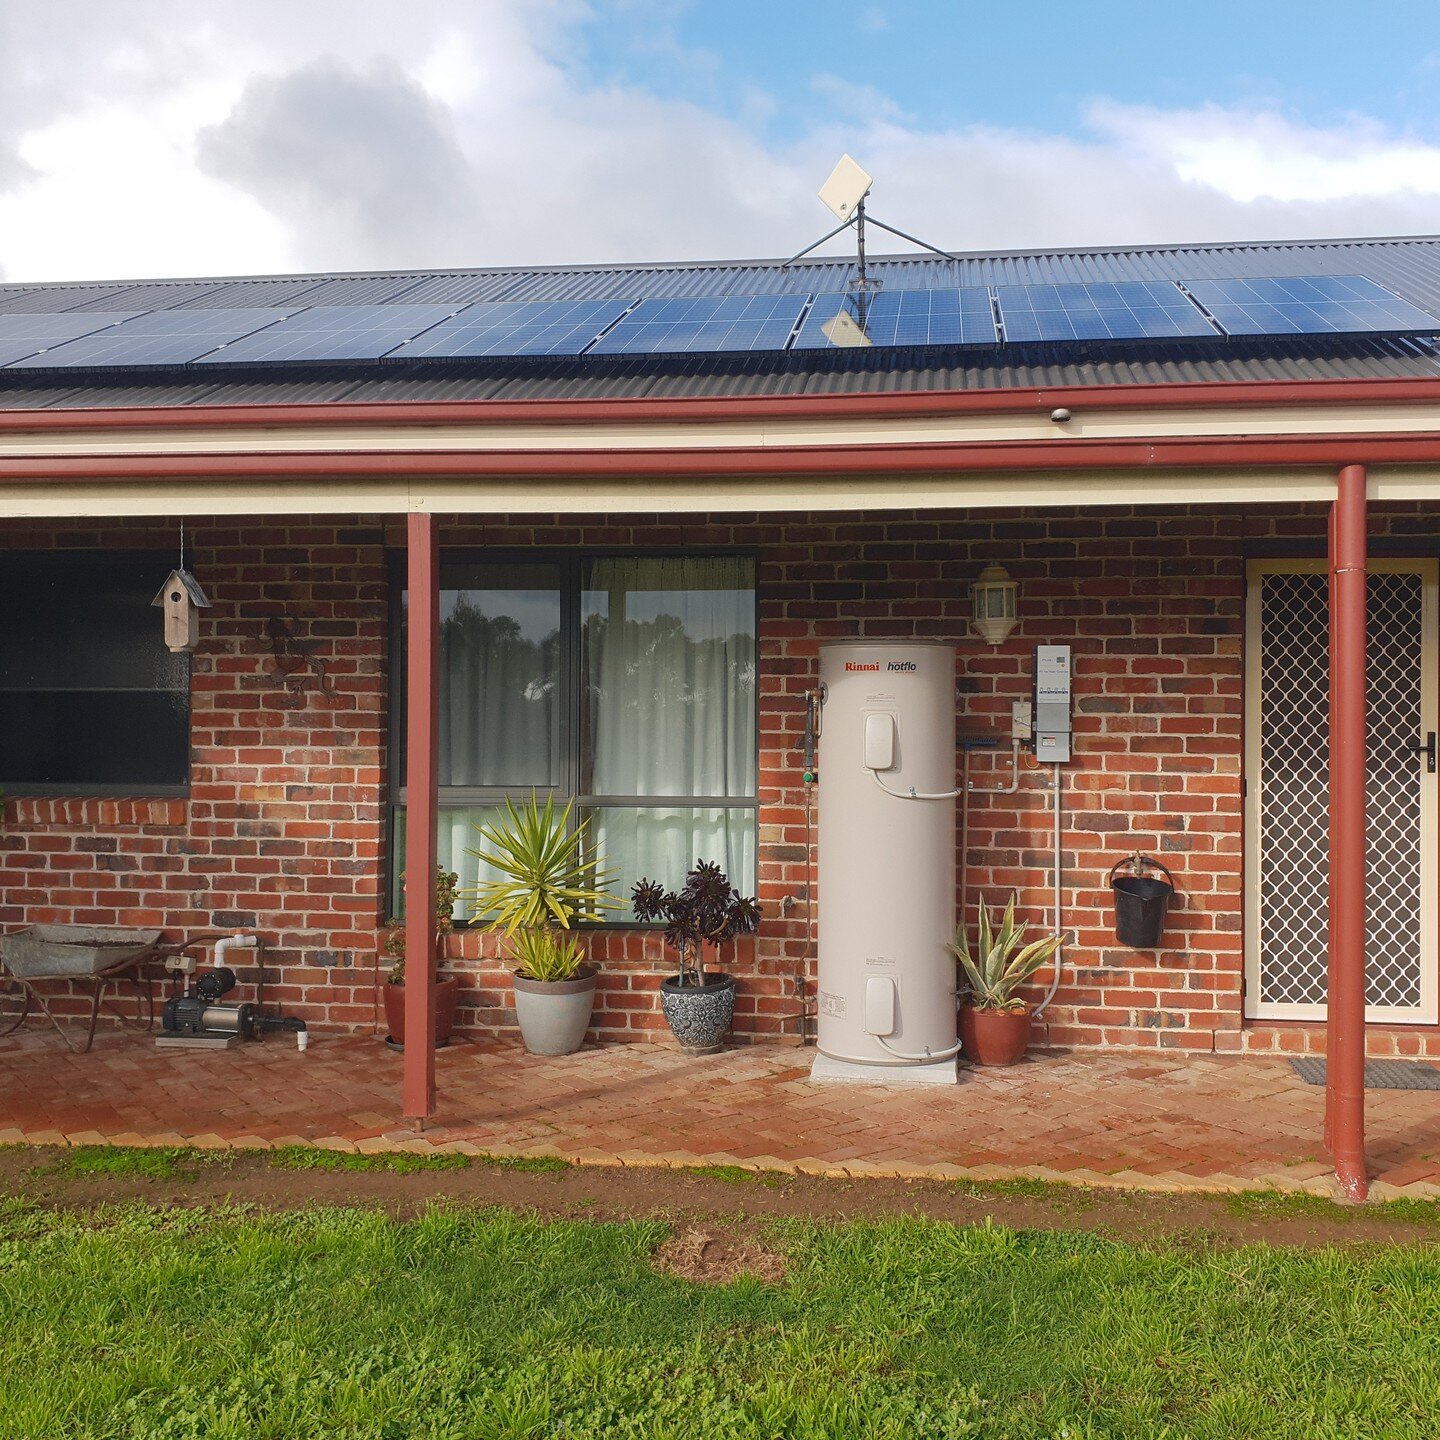 Off Grid Solar Hot Water.
Bulletproof system by Plasmatronics.
6-8 Solar panels running a conventional electric hot water heater, ideal for houses with plenty of roof space.